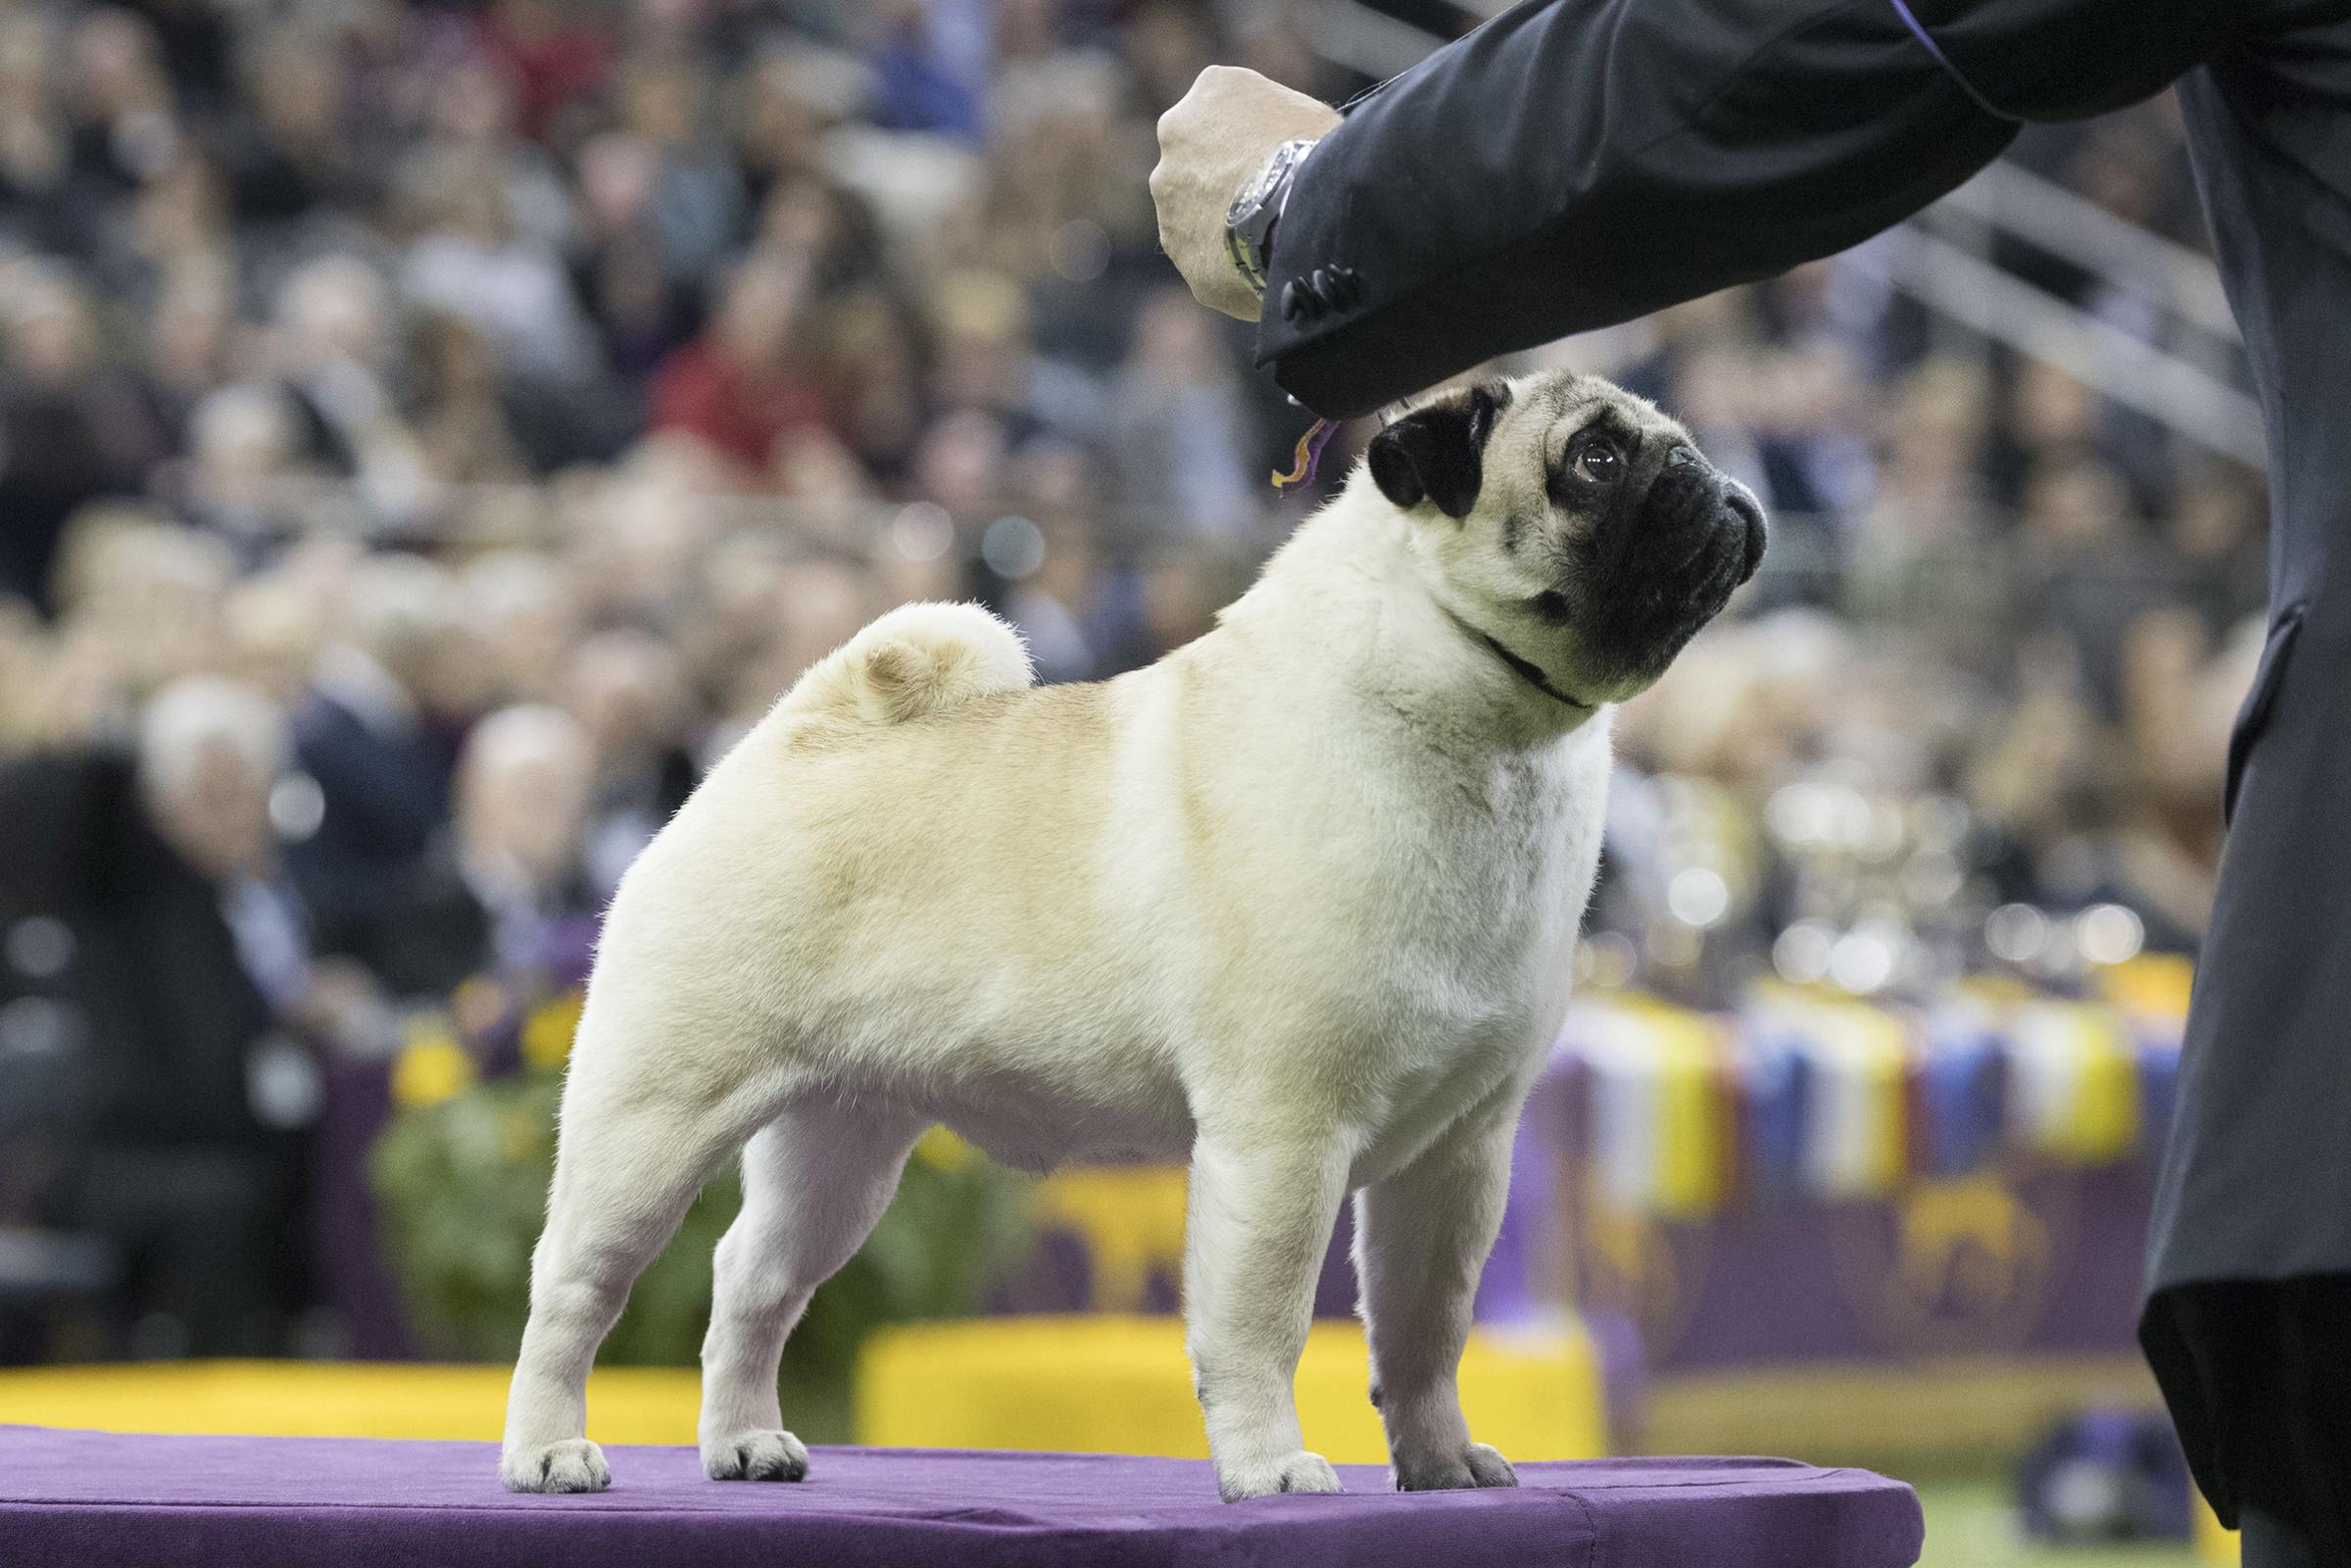 Esteban Farias shows Biggie, a pug, in the ring during the Toy group competition during the 142nd Westminster Kennel Club Dog Show.